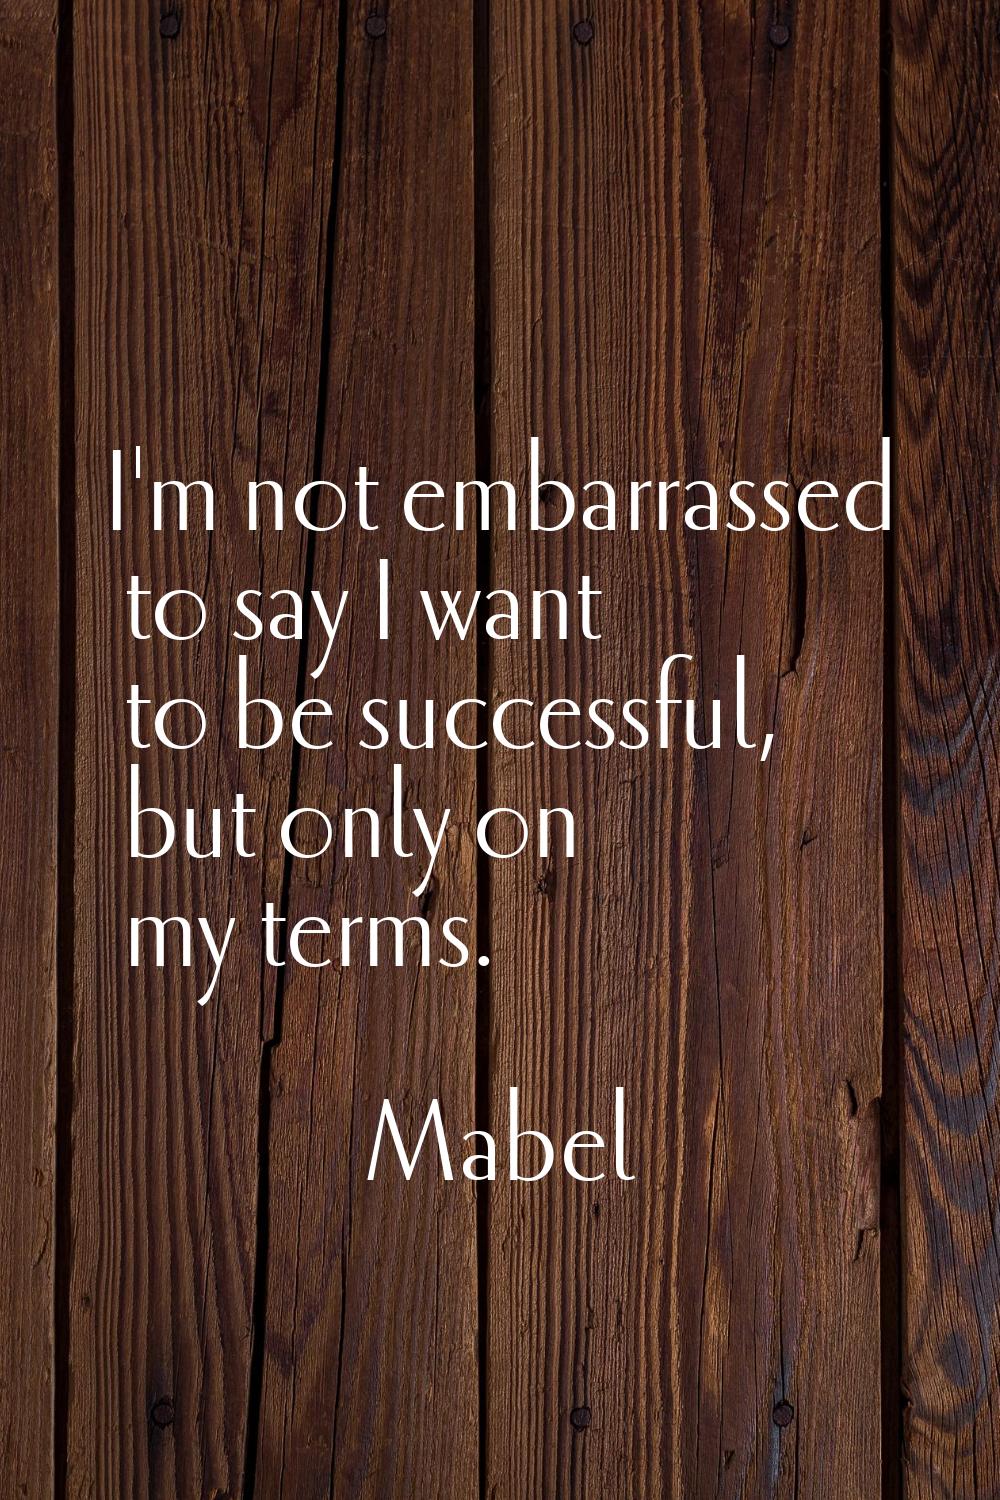 I'm not embarrassed to say I want to be successful, but only on my terms.